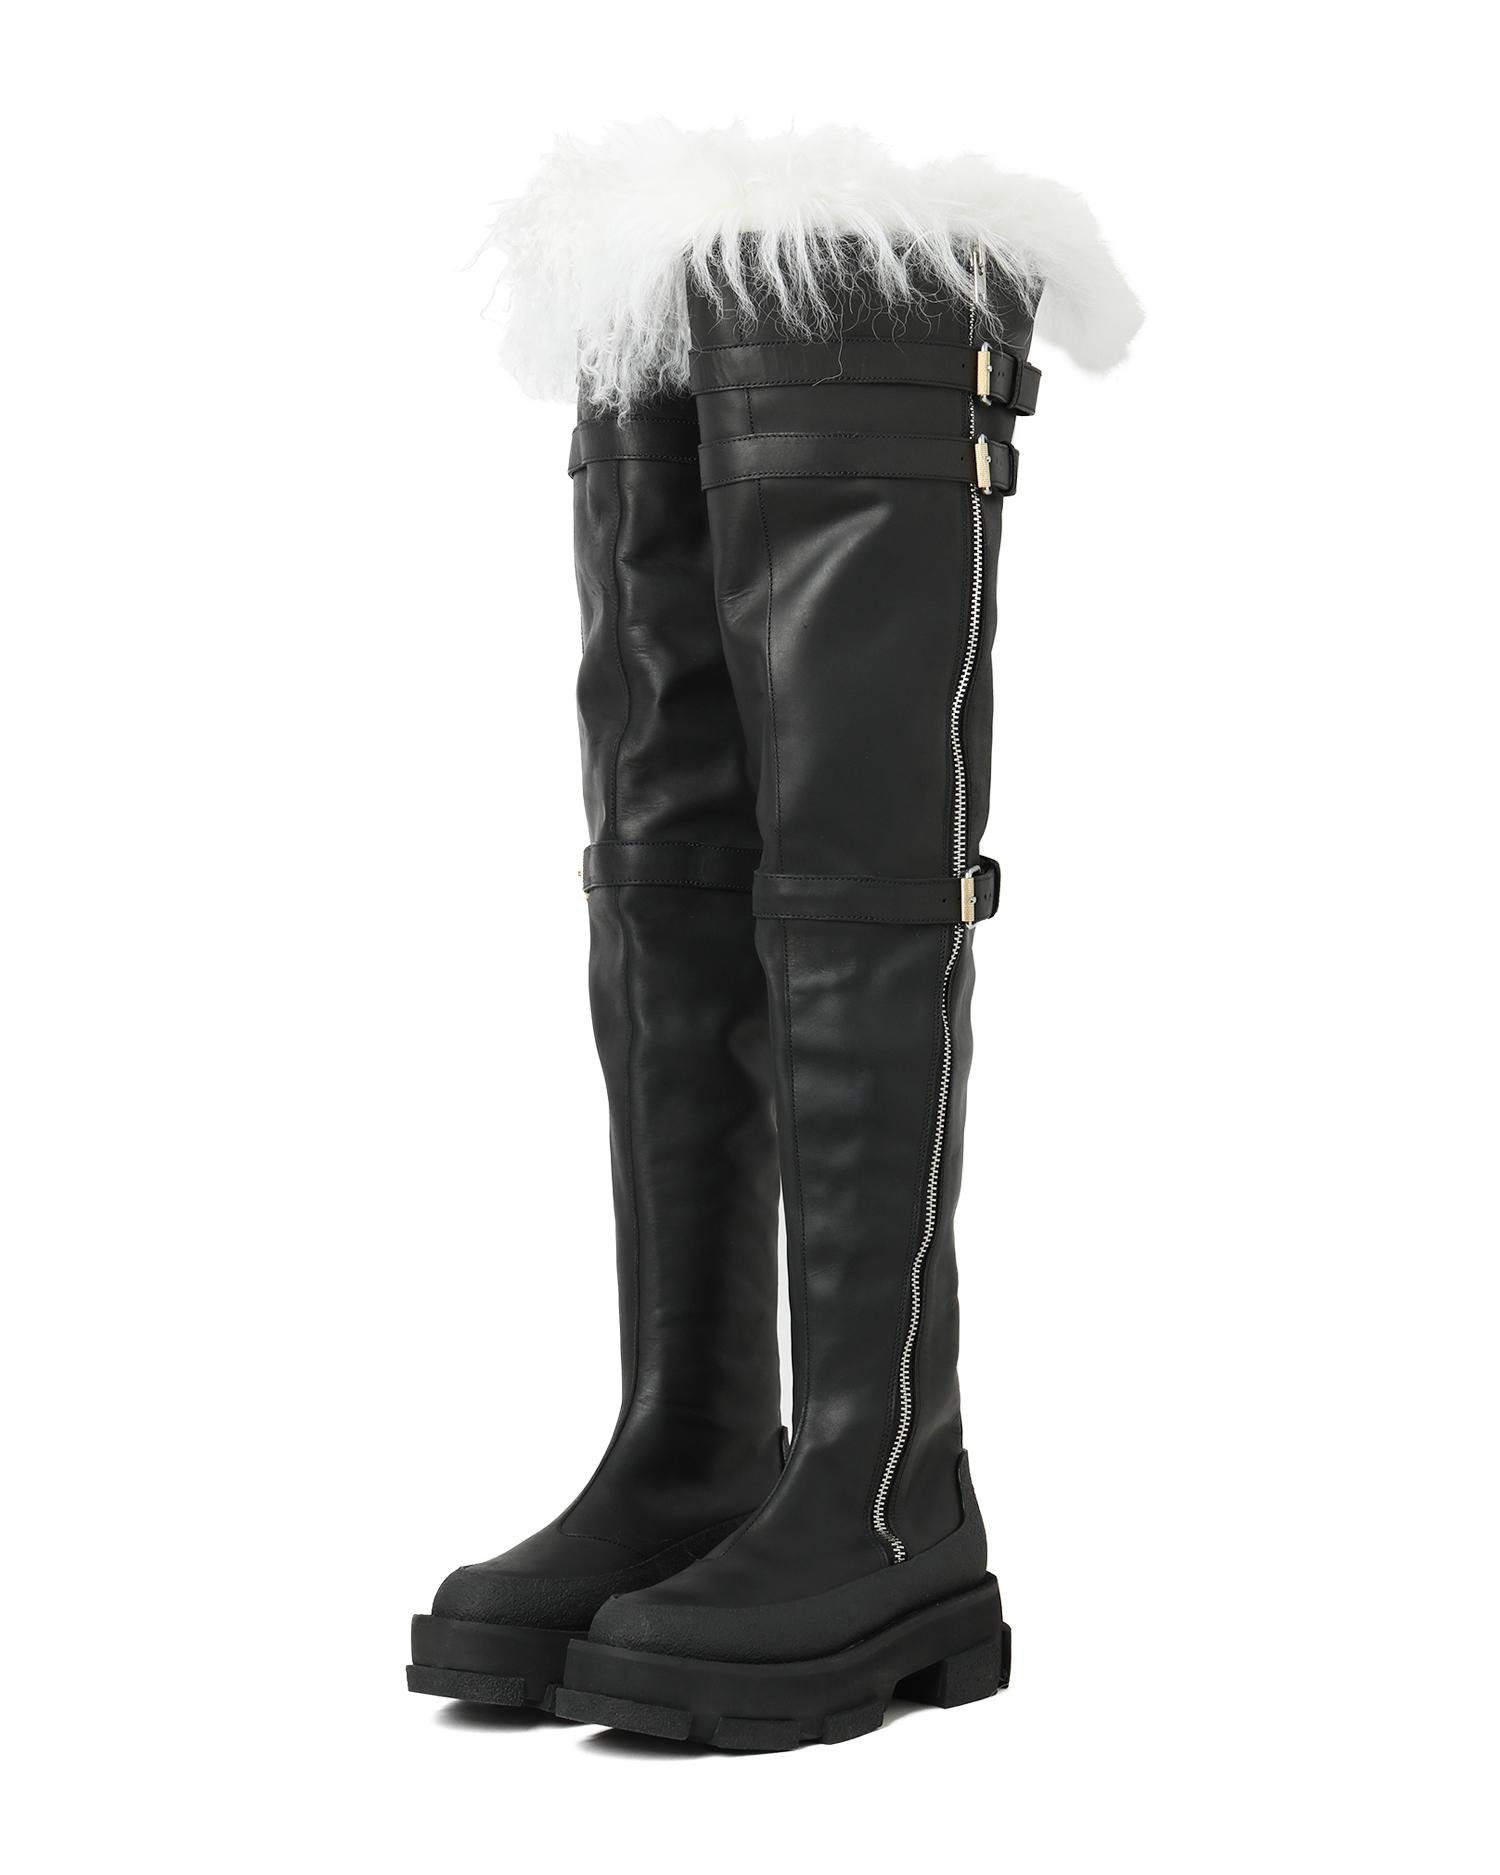 X Dion Lee Gao platform shearling boots by BOTH | jellibeans